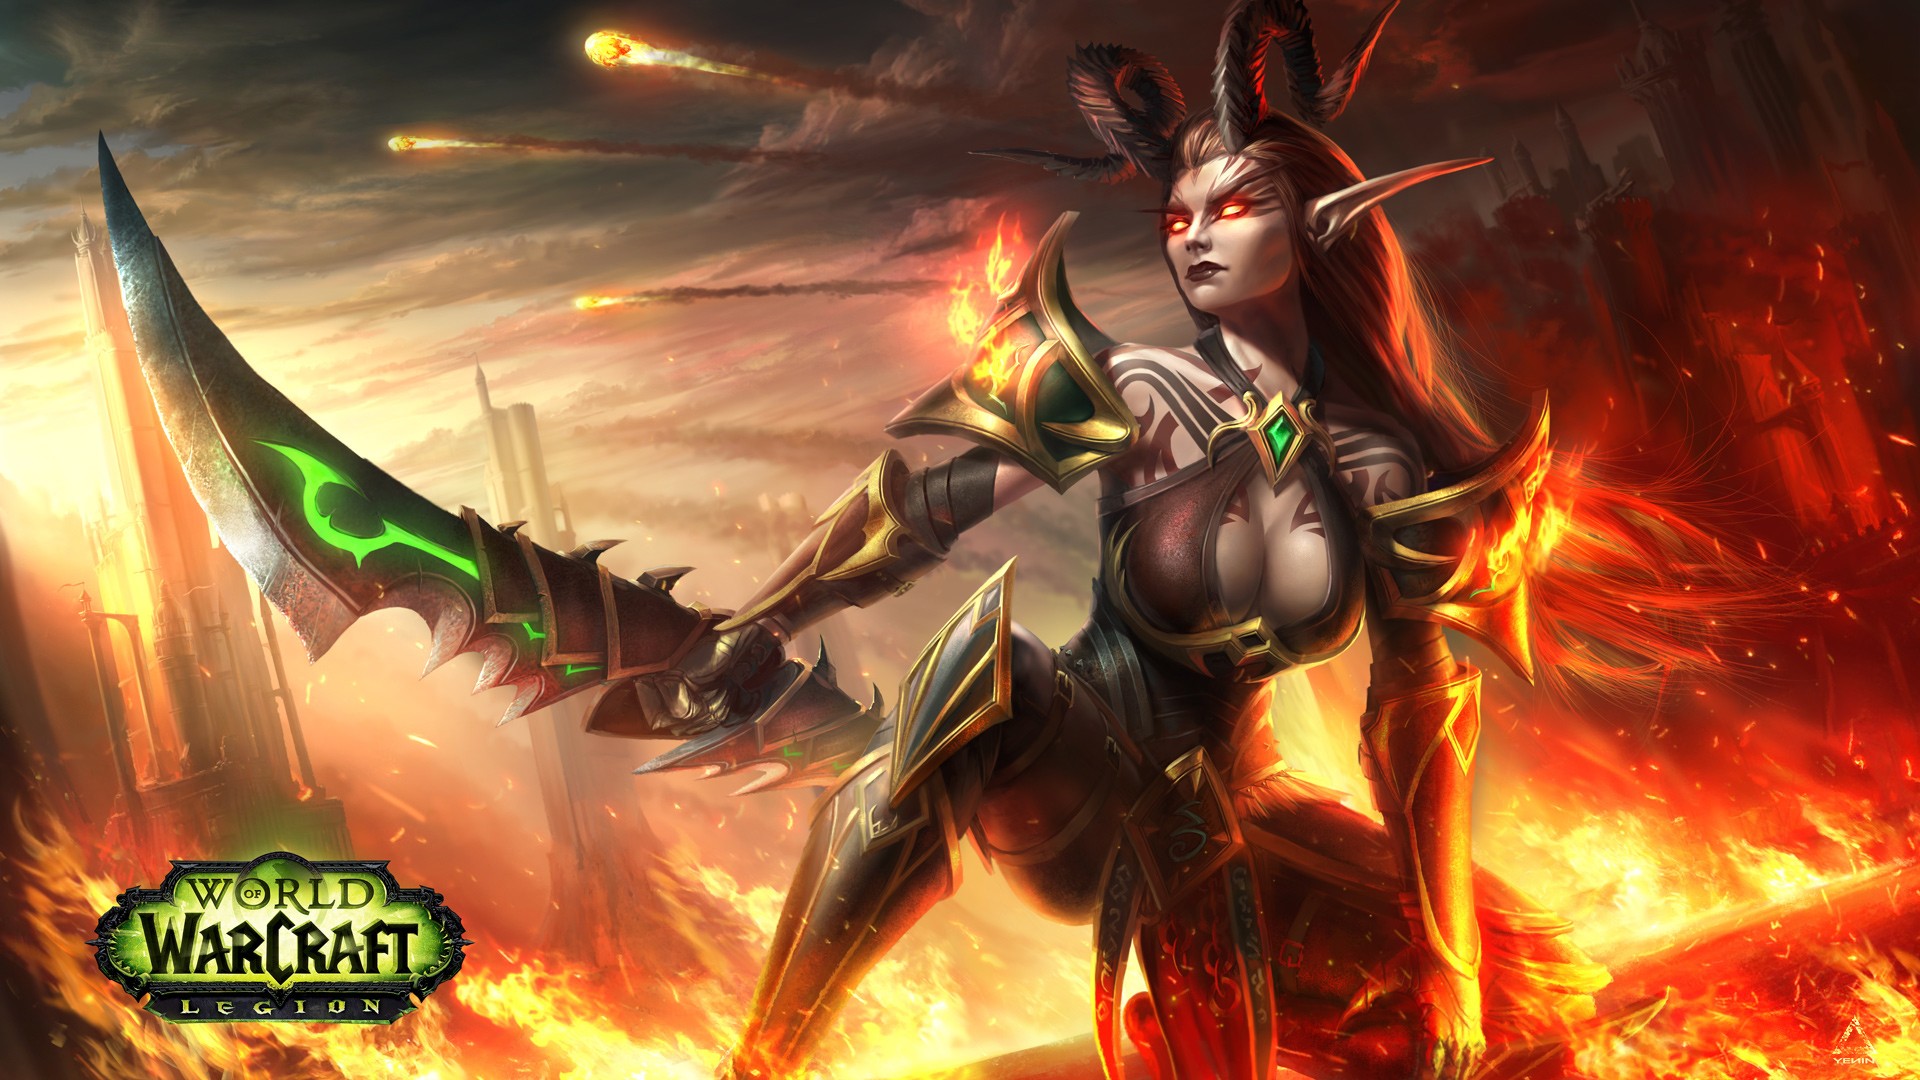 General 1920x1080 World of Warcraft World of Warcraft: Legion blood elves Demon Hunter Blizzard Entertainment boobs big boobs cleavage PC gaming pointy ears horns red eyes glowing eyes fantasy armor armor digital art Warcraft